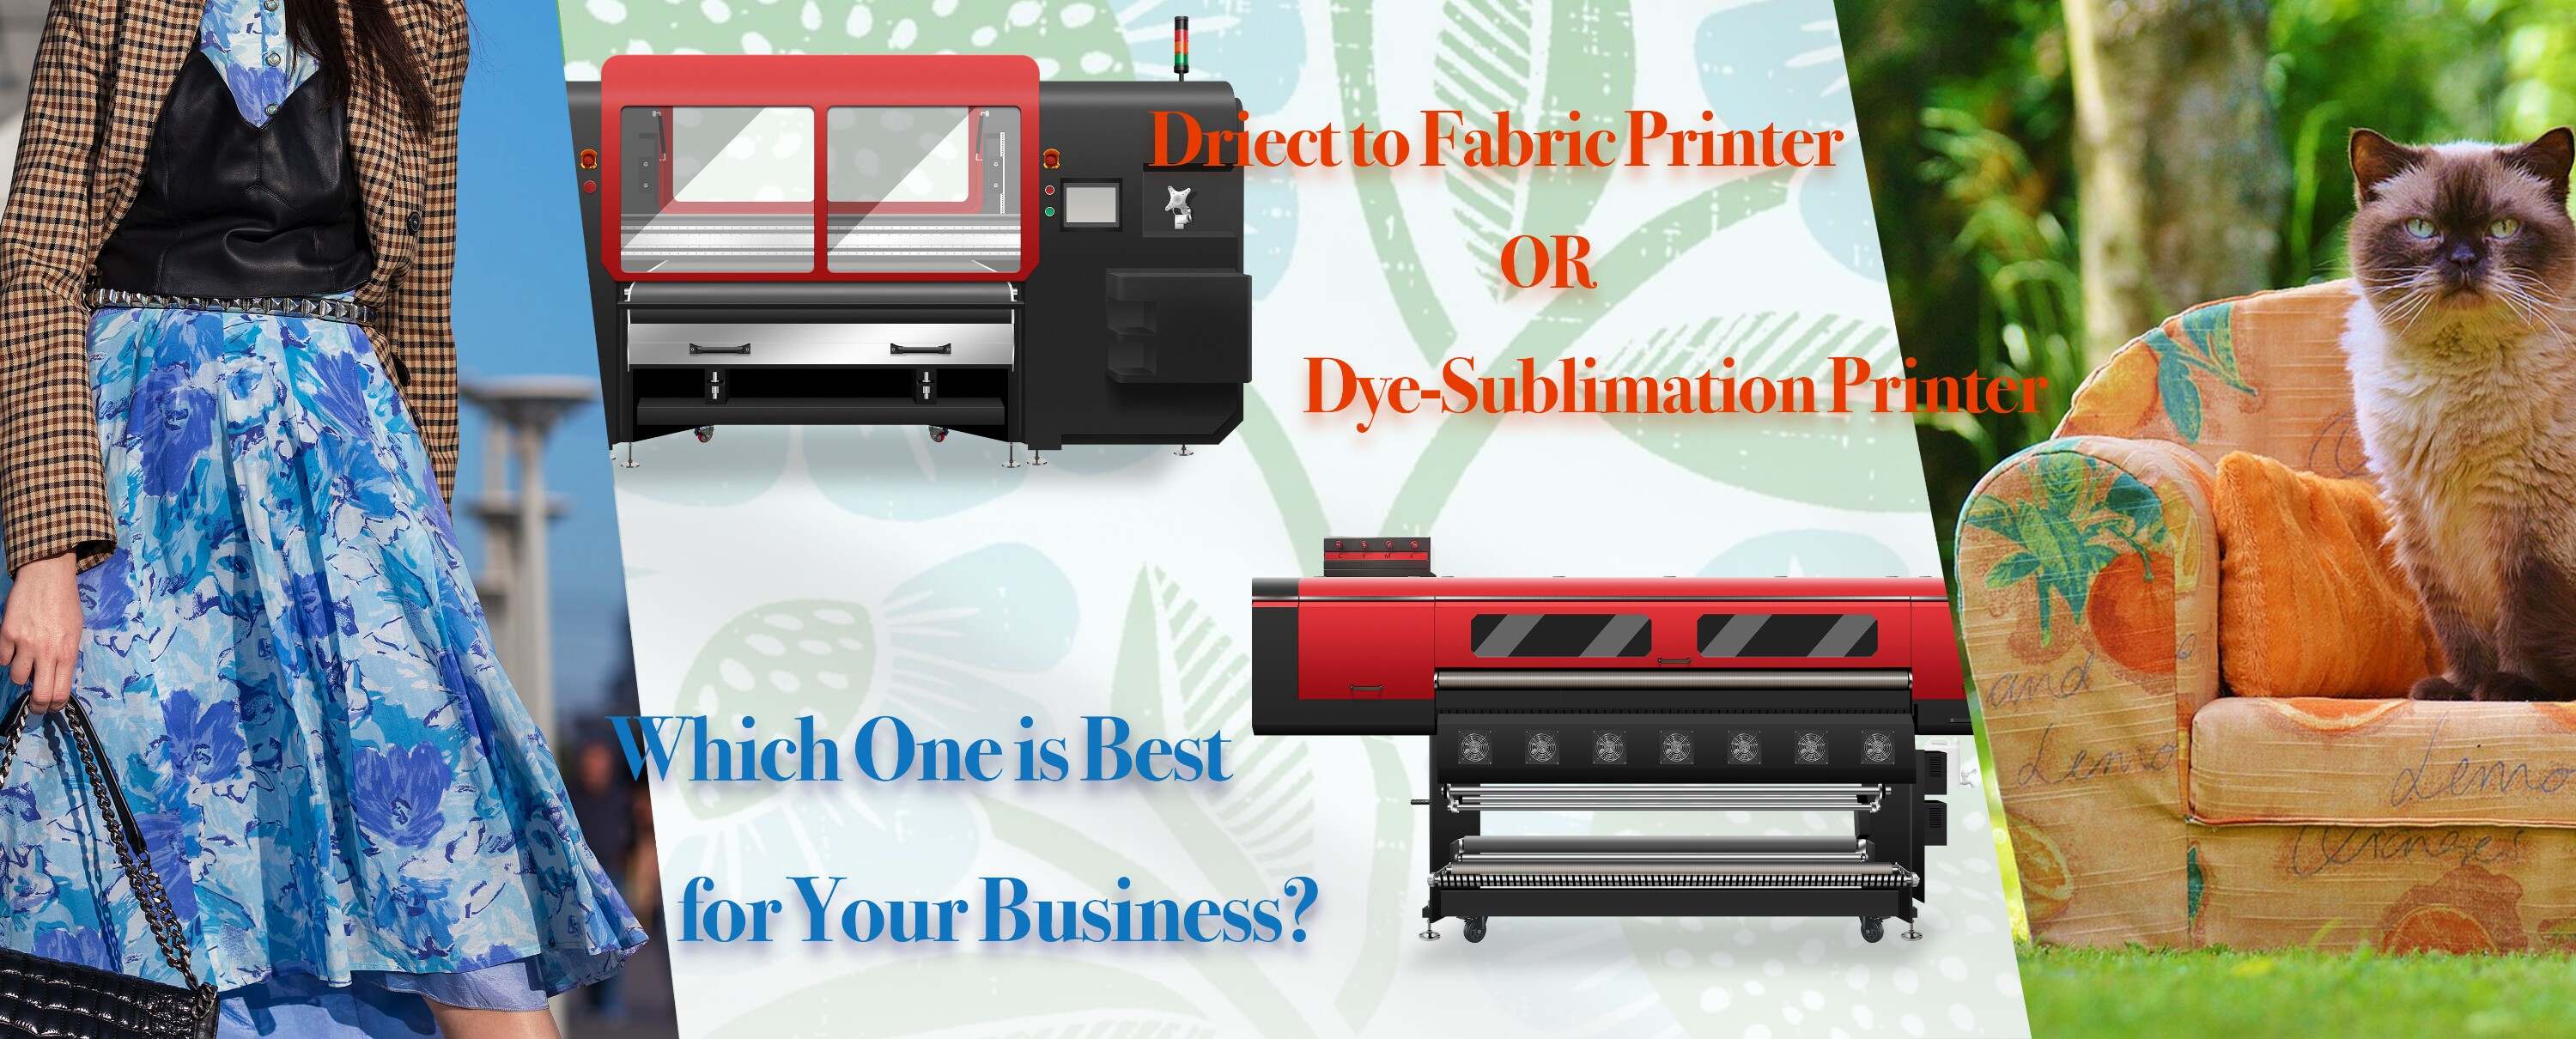 Difference Between Direct-to-Fabric Printers and Dye-Sublimation Printers